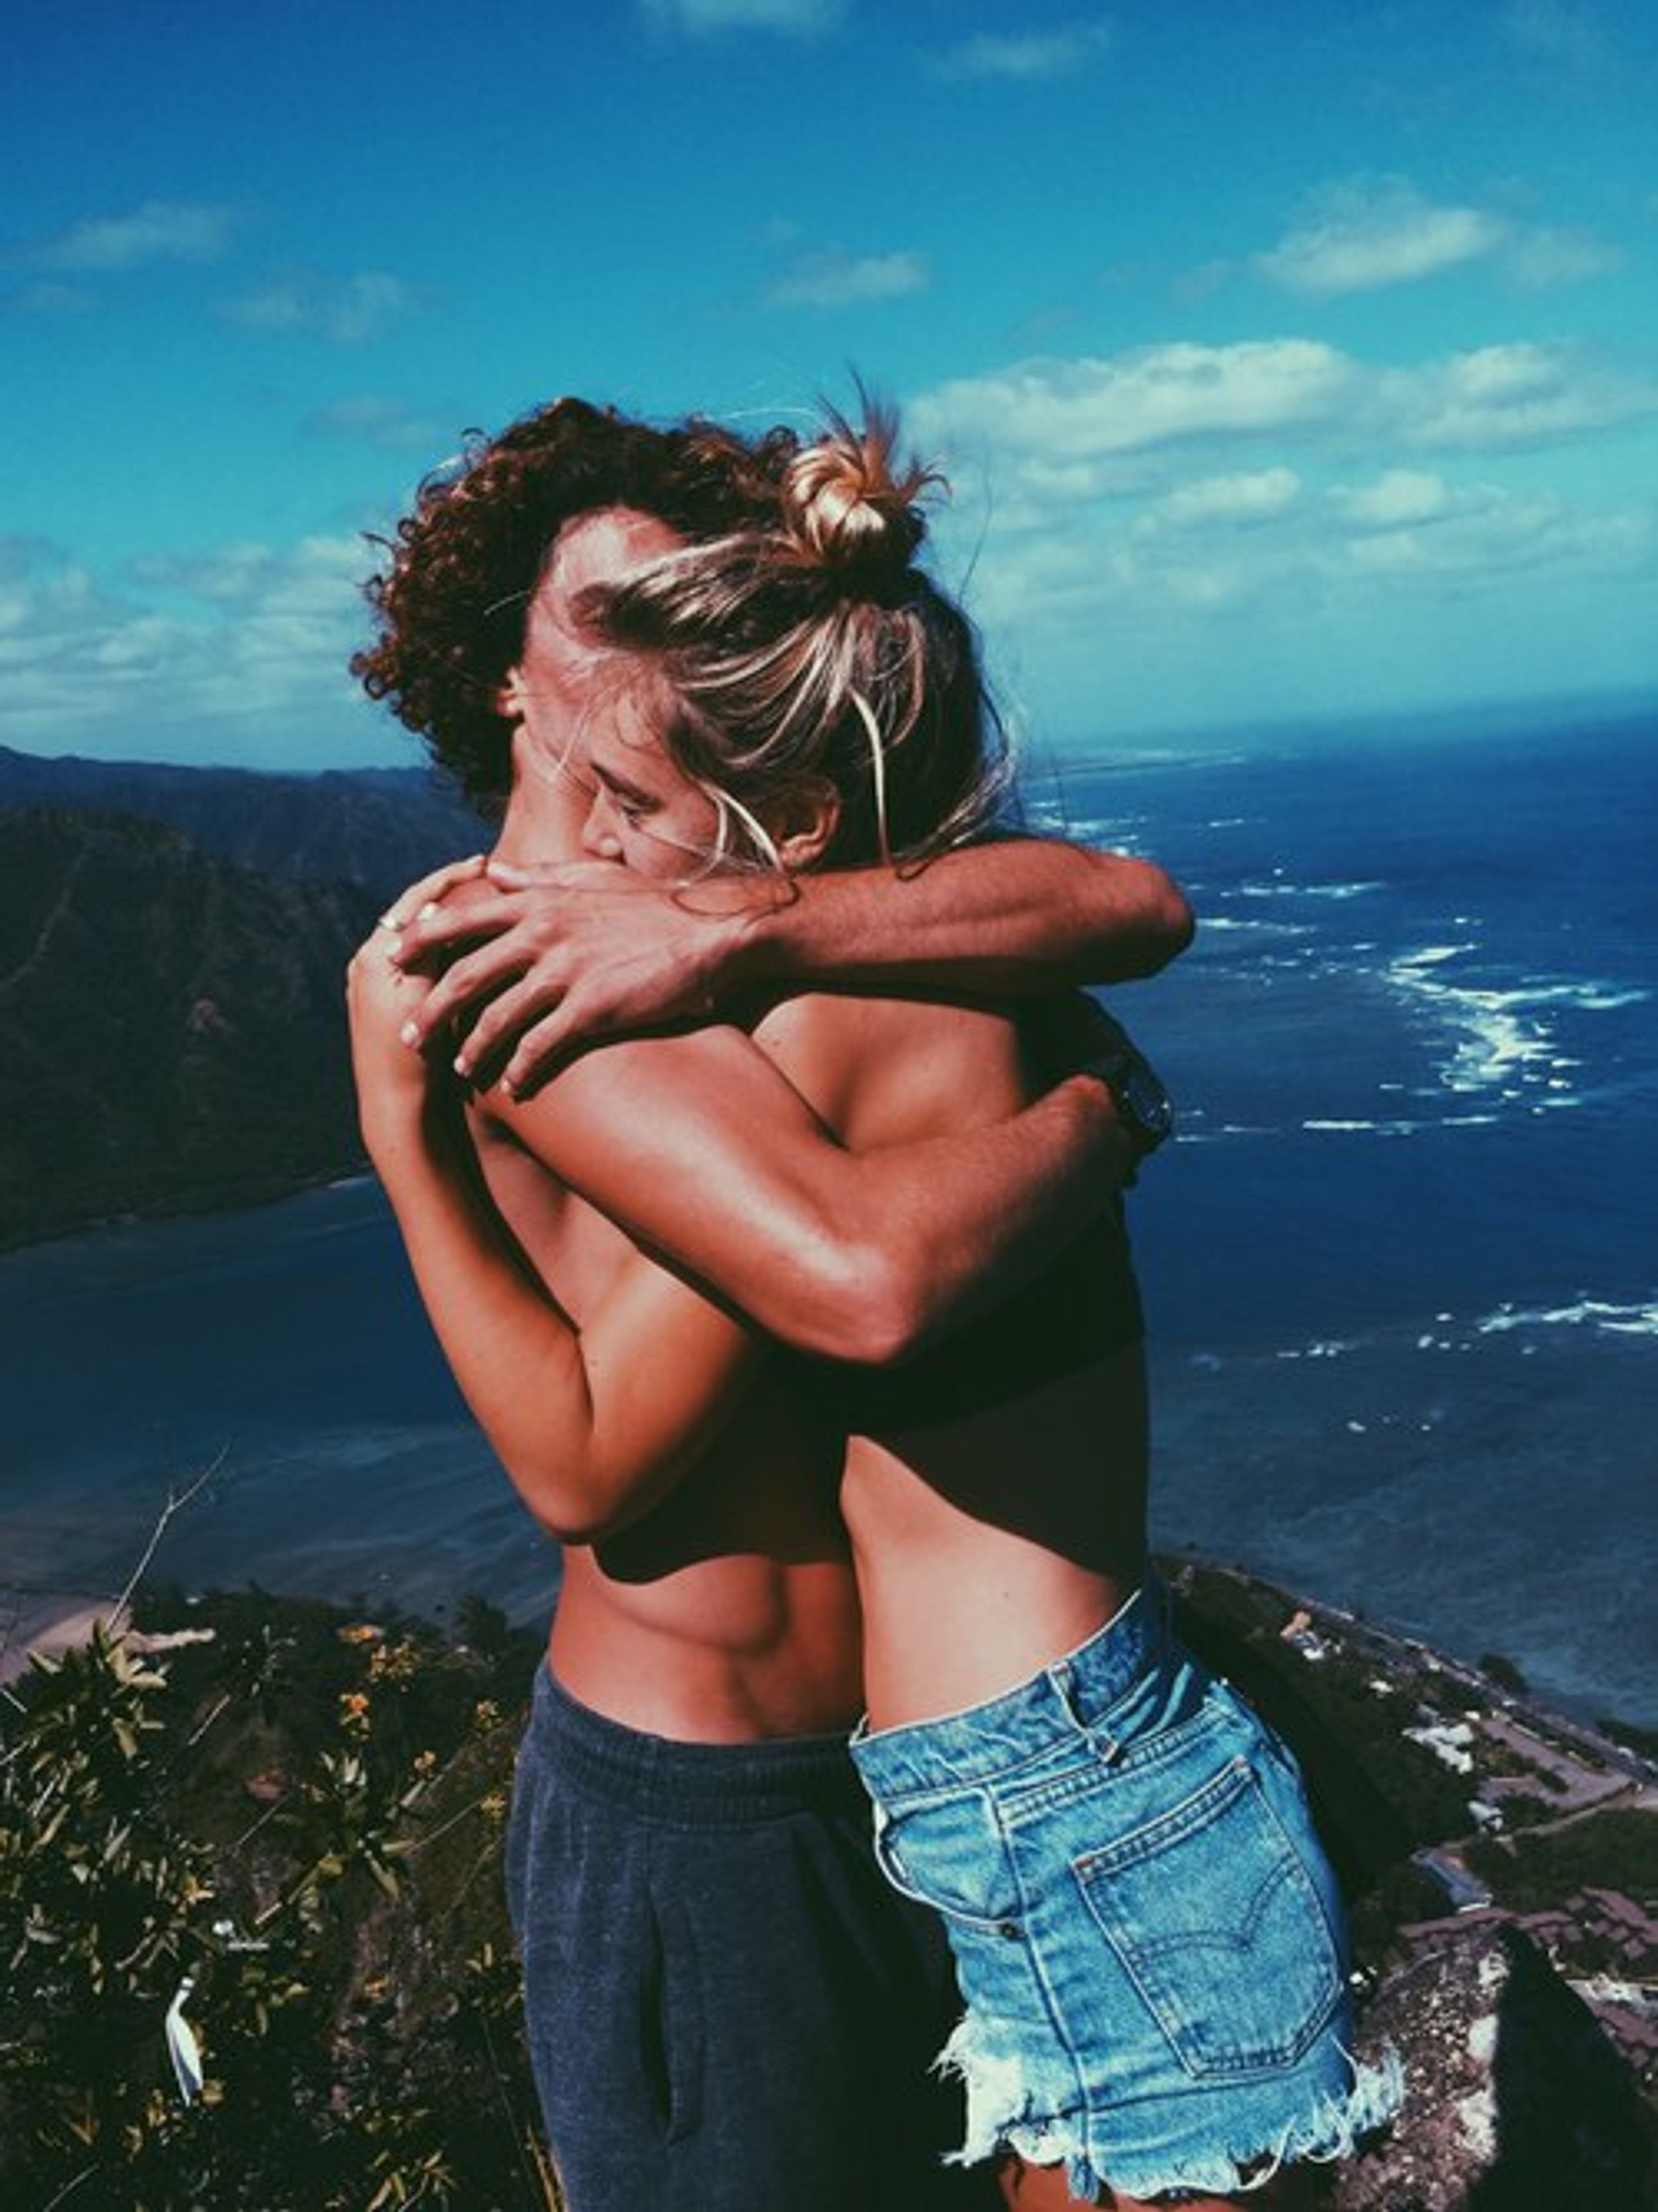 9 Things To Do With Your Boyfriend Over The Summer